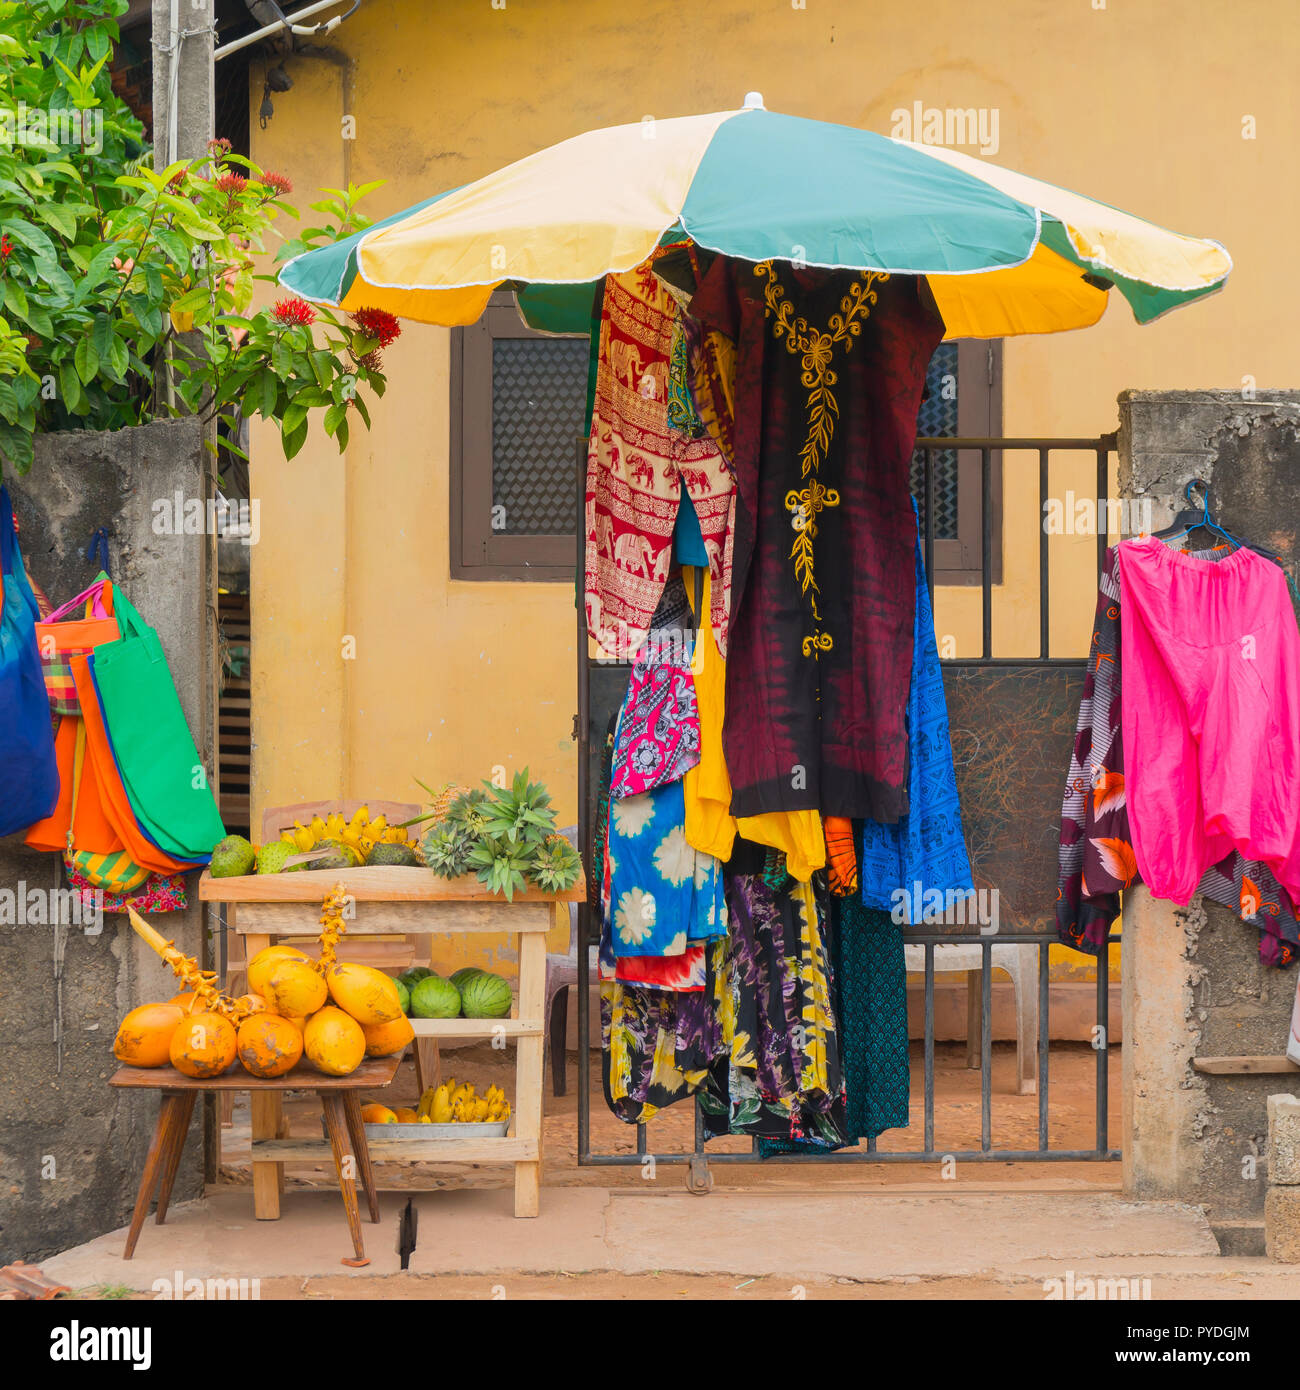 Sale of clothes and fruits on the street. Stock Photo